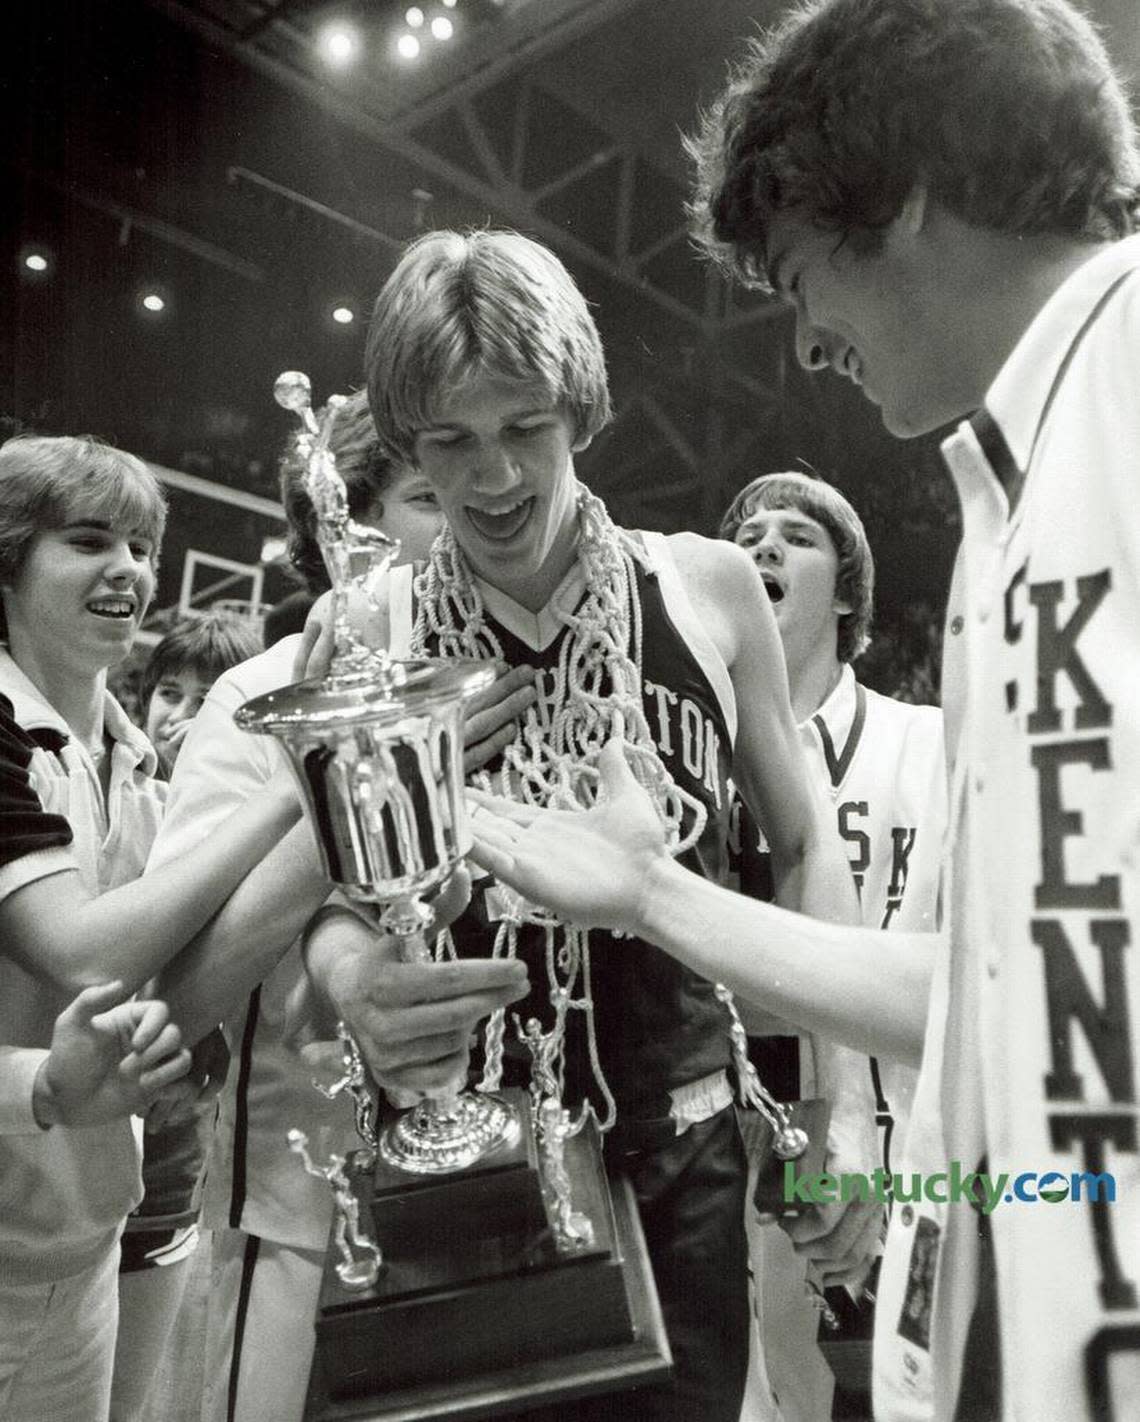 Simon Kenton’s Troy McKinley, center, held the state tournament MVP trophy and celebrated with teammates after beating Mason County 70-63 in the 1981 Sweet 16 championship game at Rupp Arena. The game was played before what was, at that time, a world record crowd for a high school basketball game, 21,287 fans.